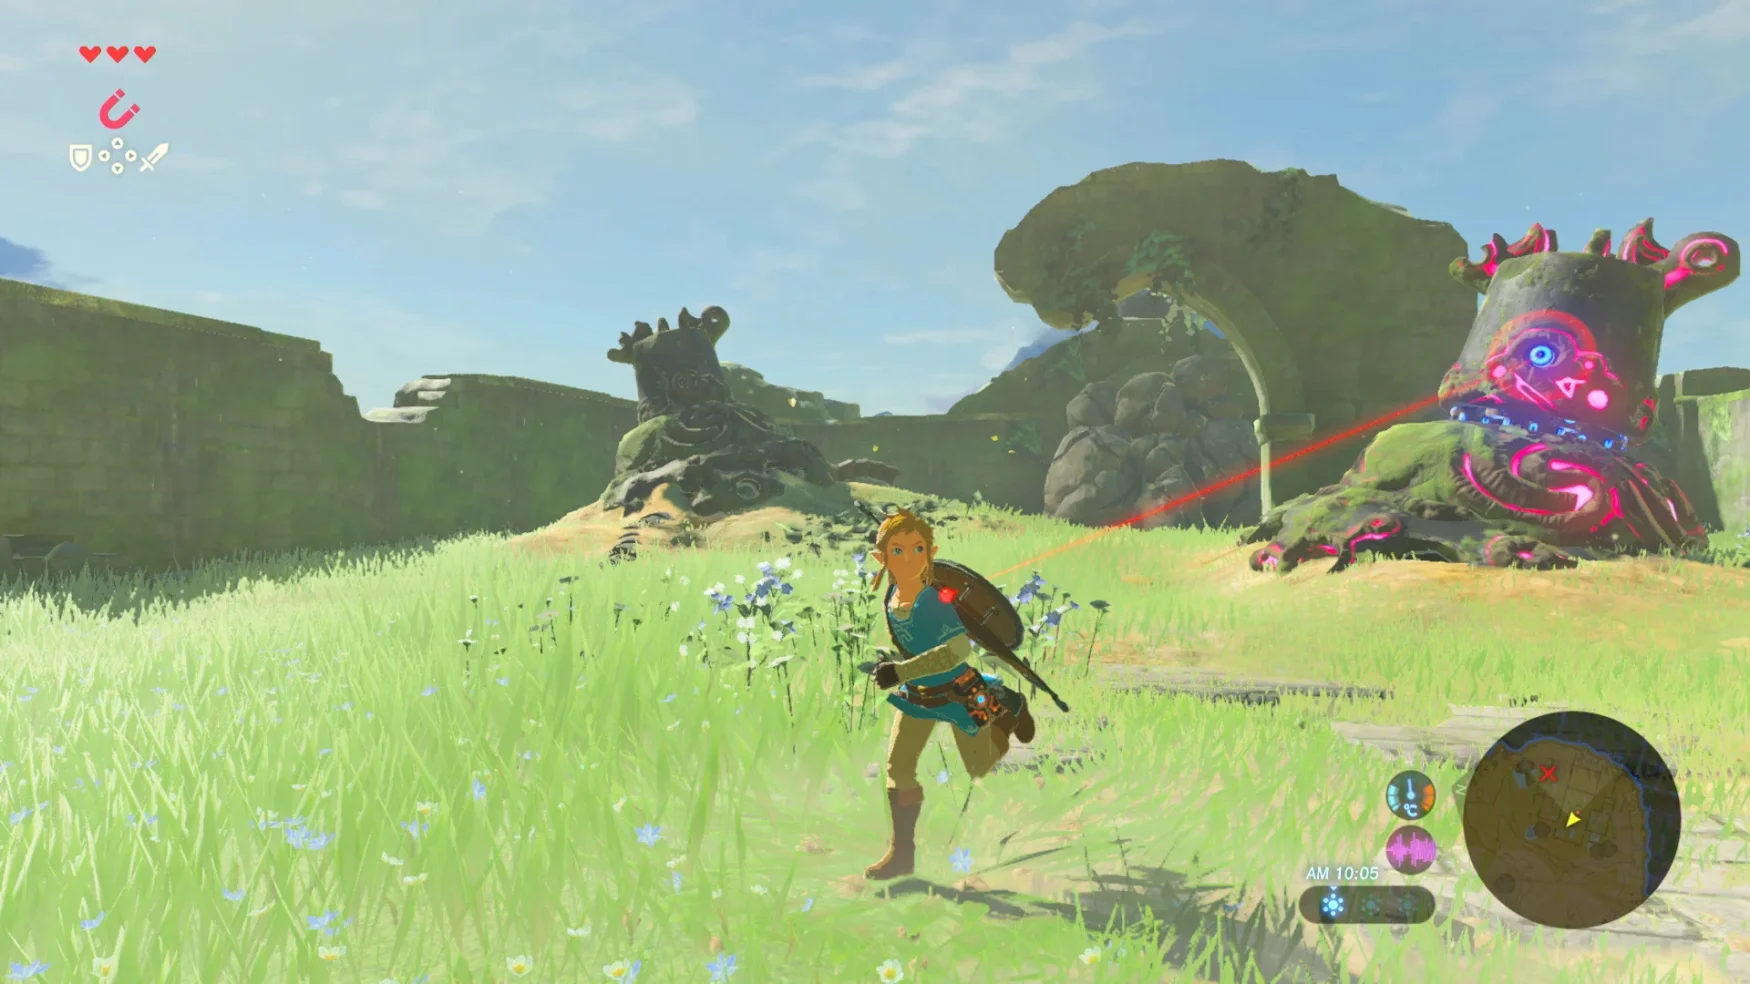 Image of Link from The Legend of Zelda: Breath of the Wild running away from a static guardian.